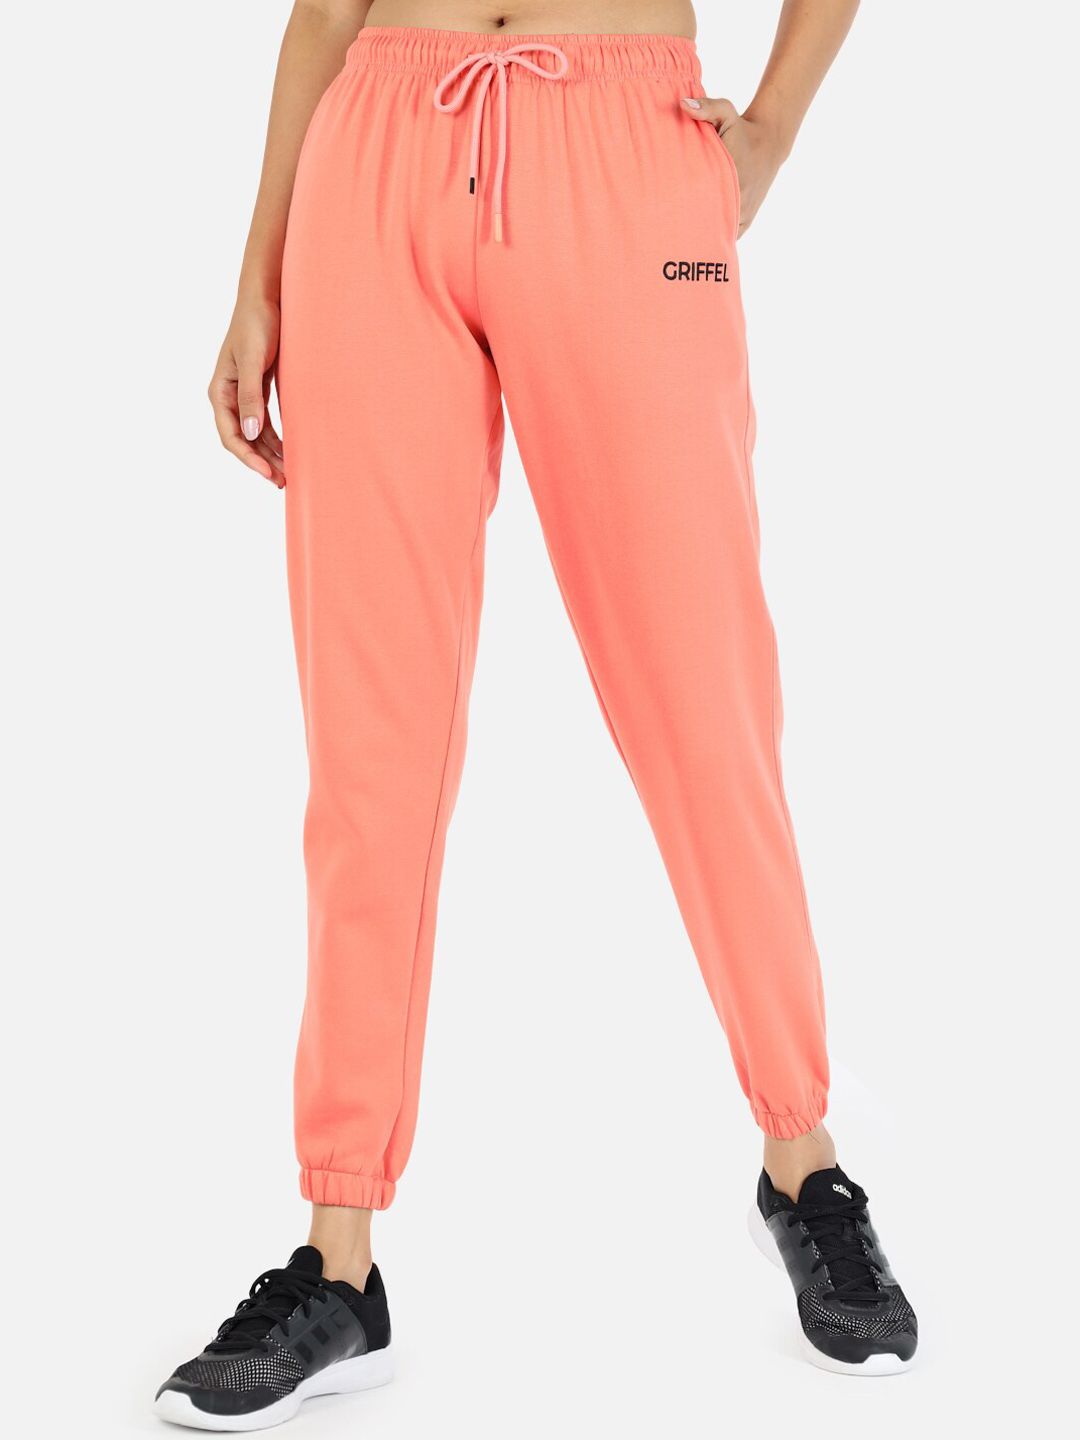 GRIFFEL Women Peach-Coloured Solid Joggers Price in India